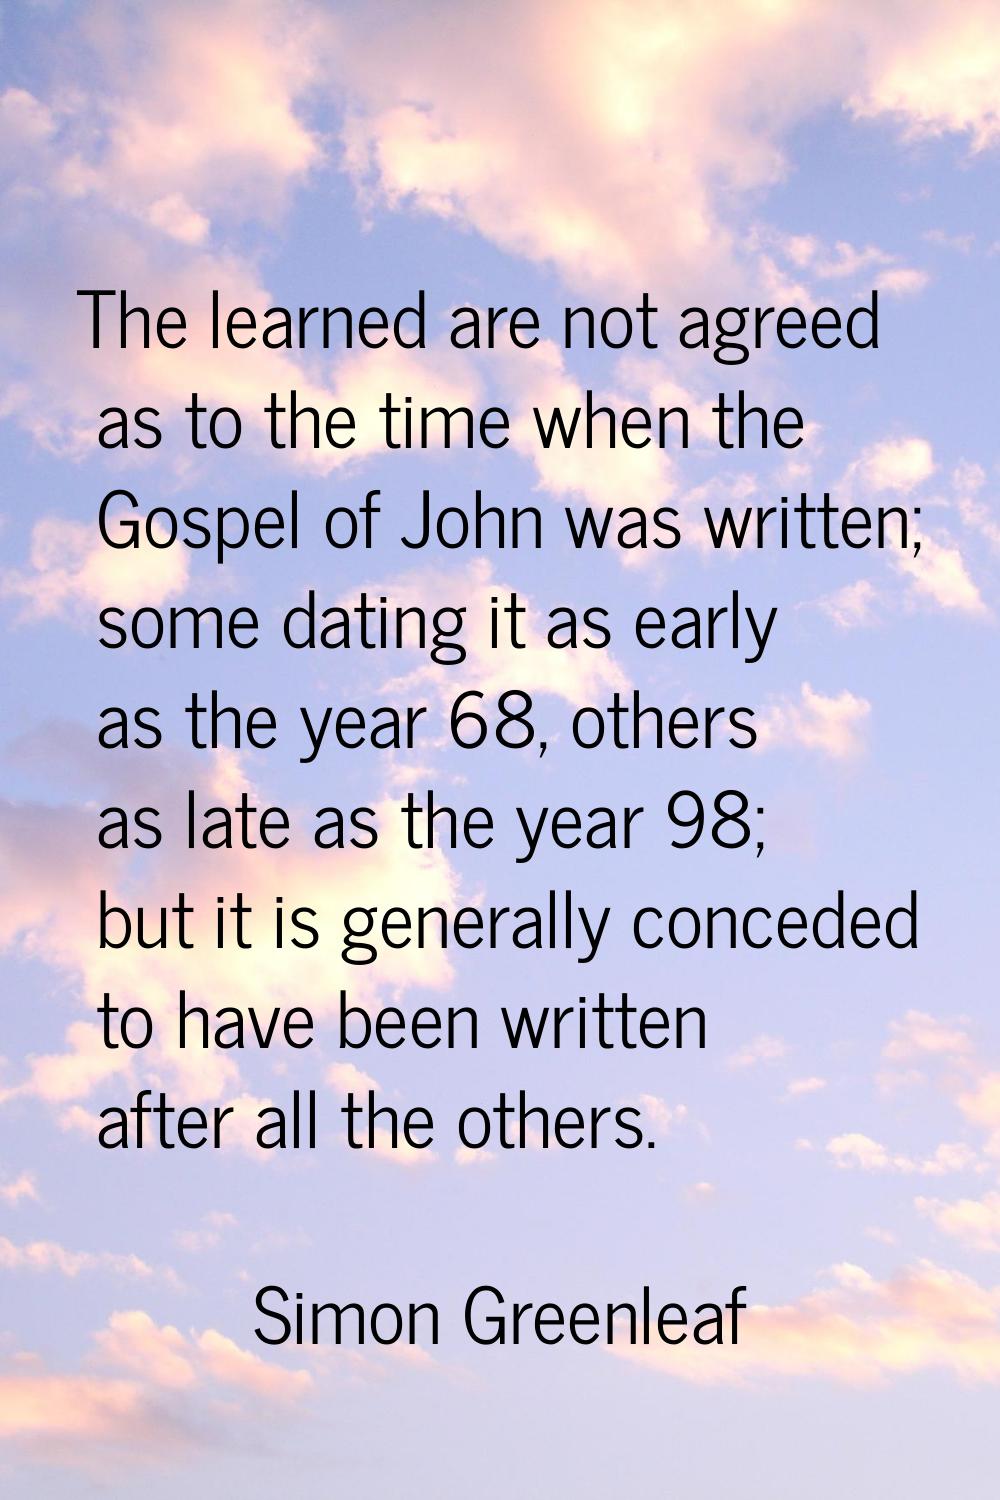 The learned are not agreed as to the time when the Gospel of John was written; some dating it as ea